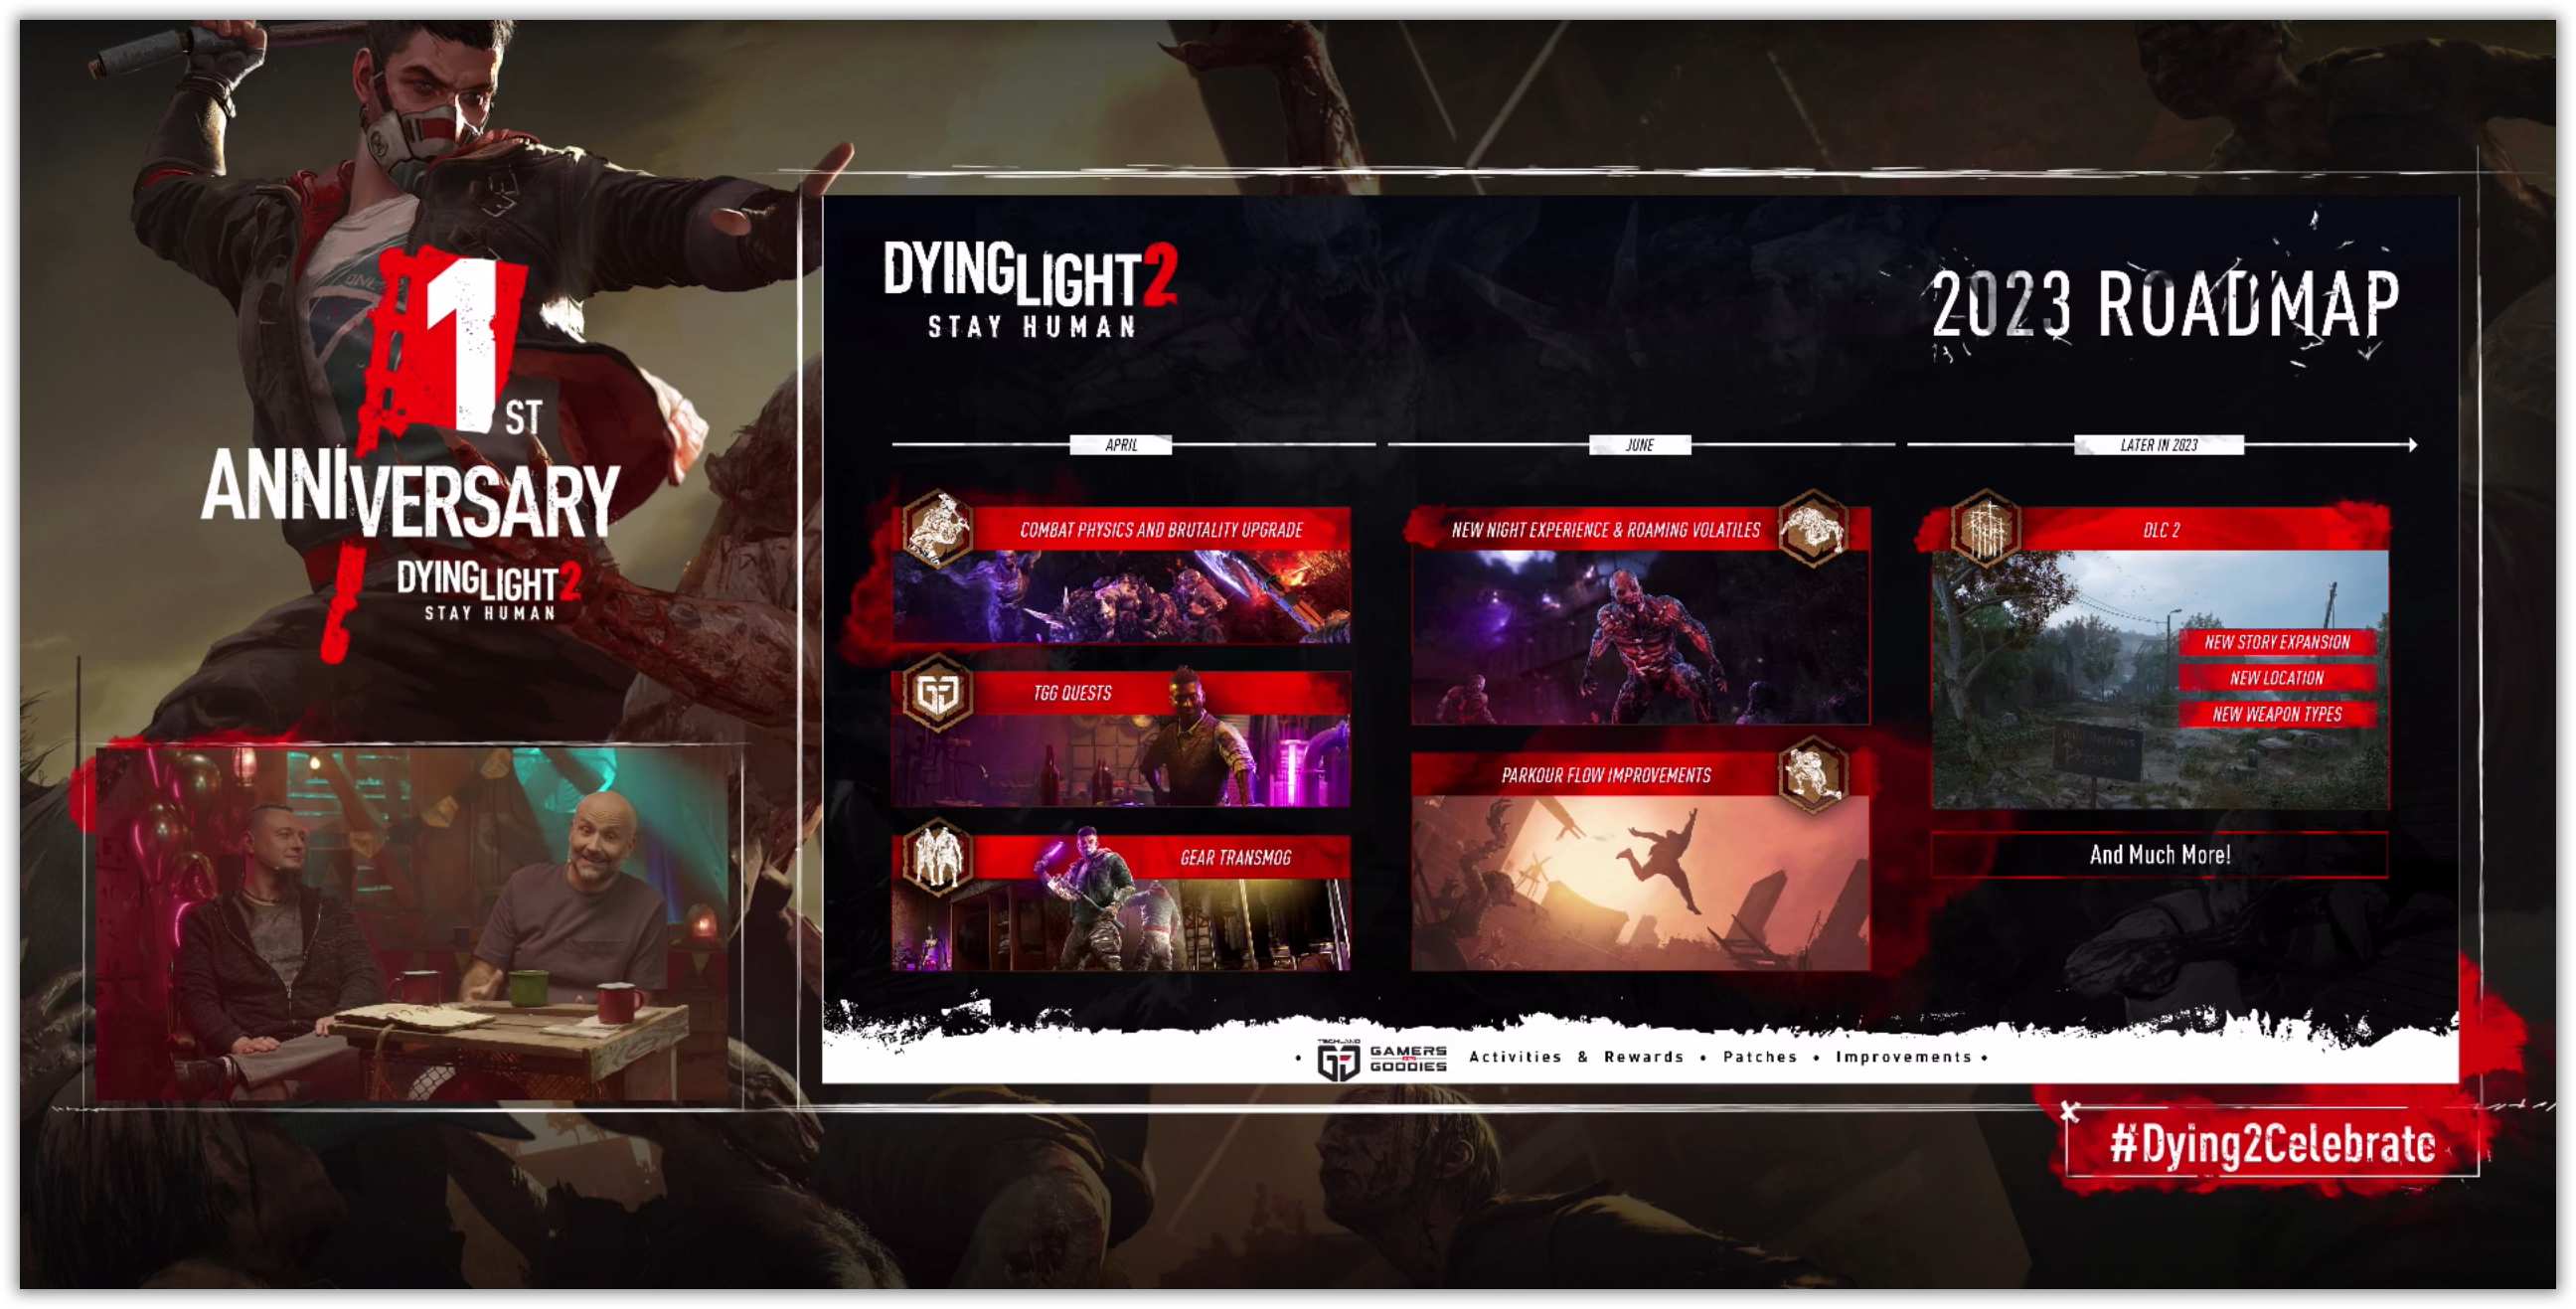 Steam is required in order to play dying light лицензия фото 105